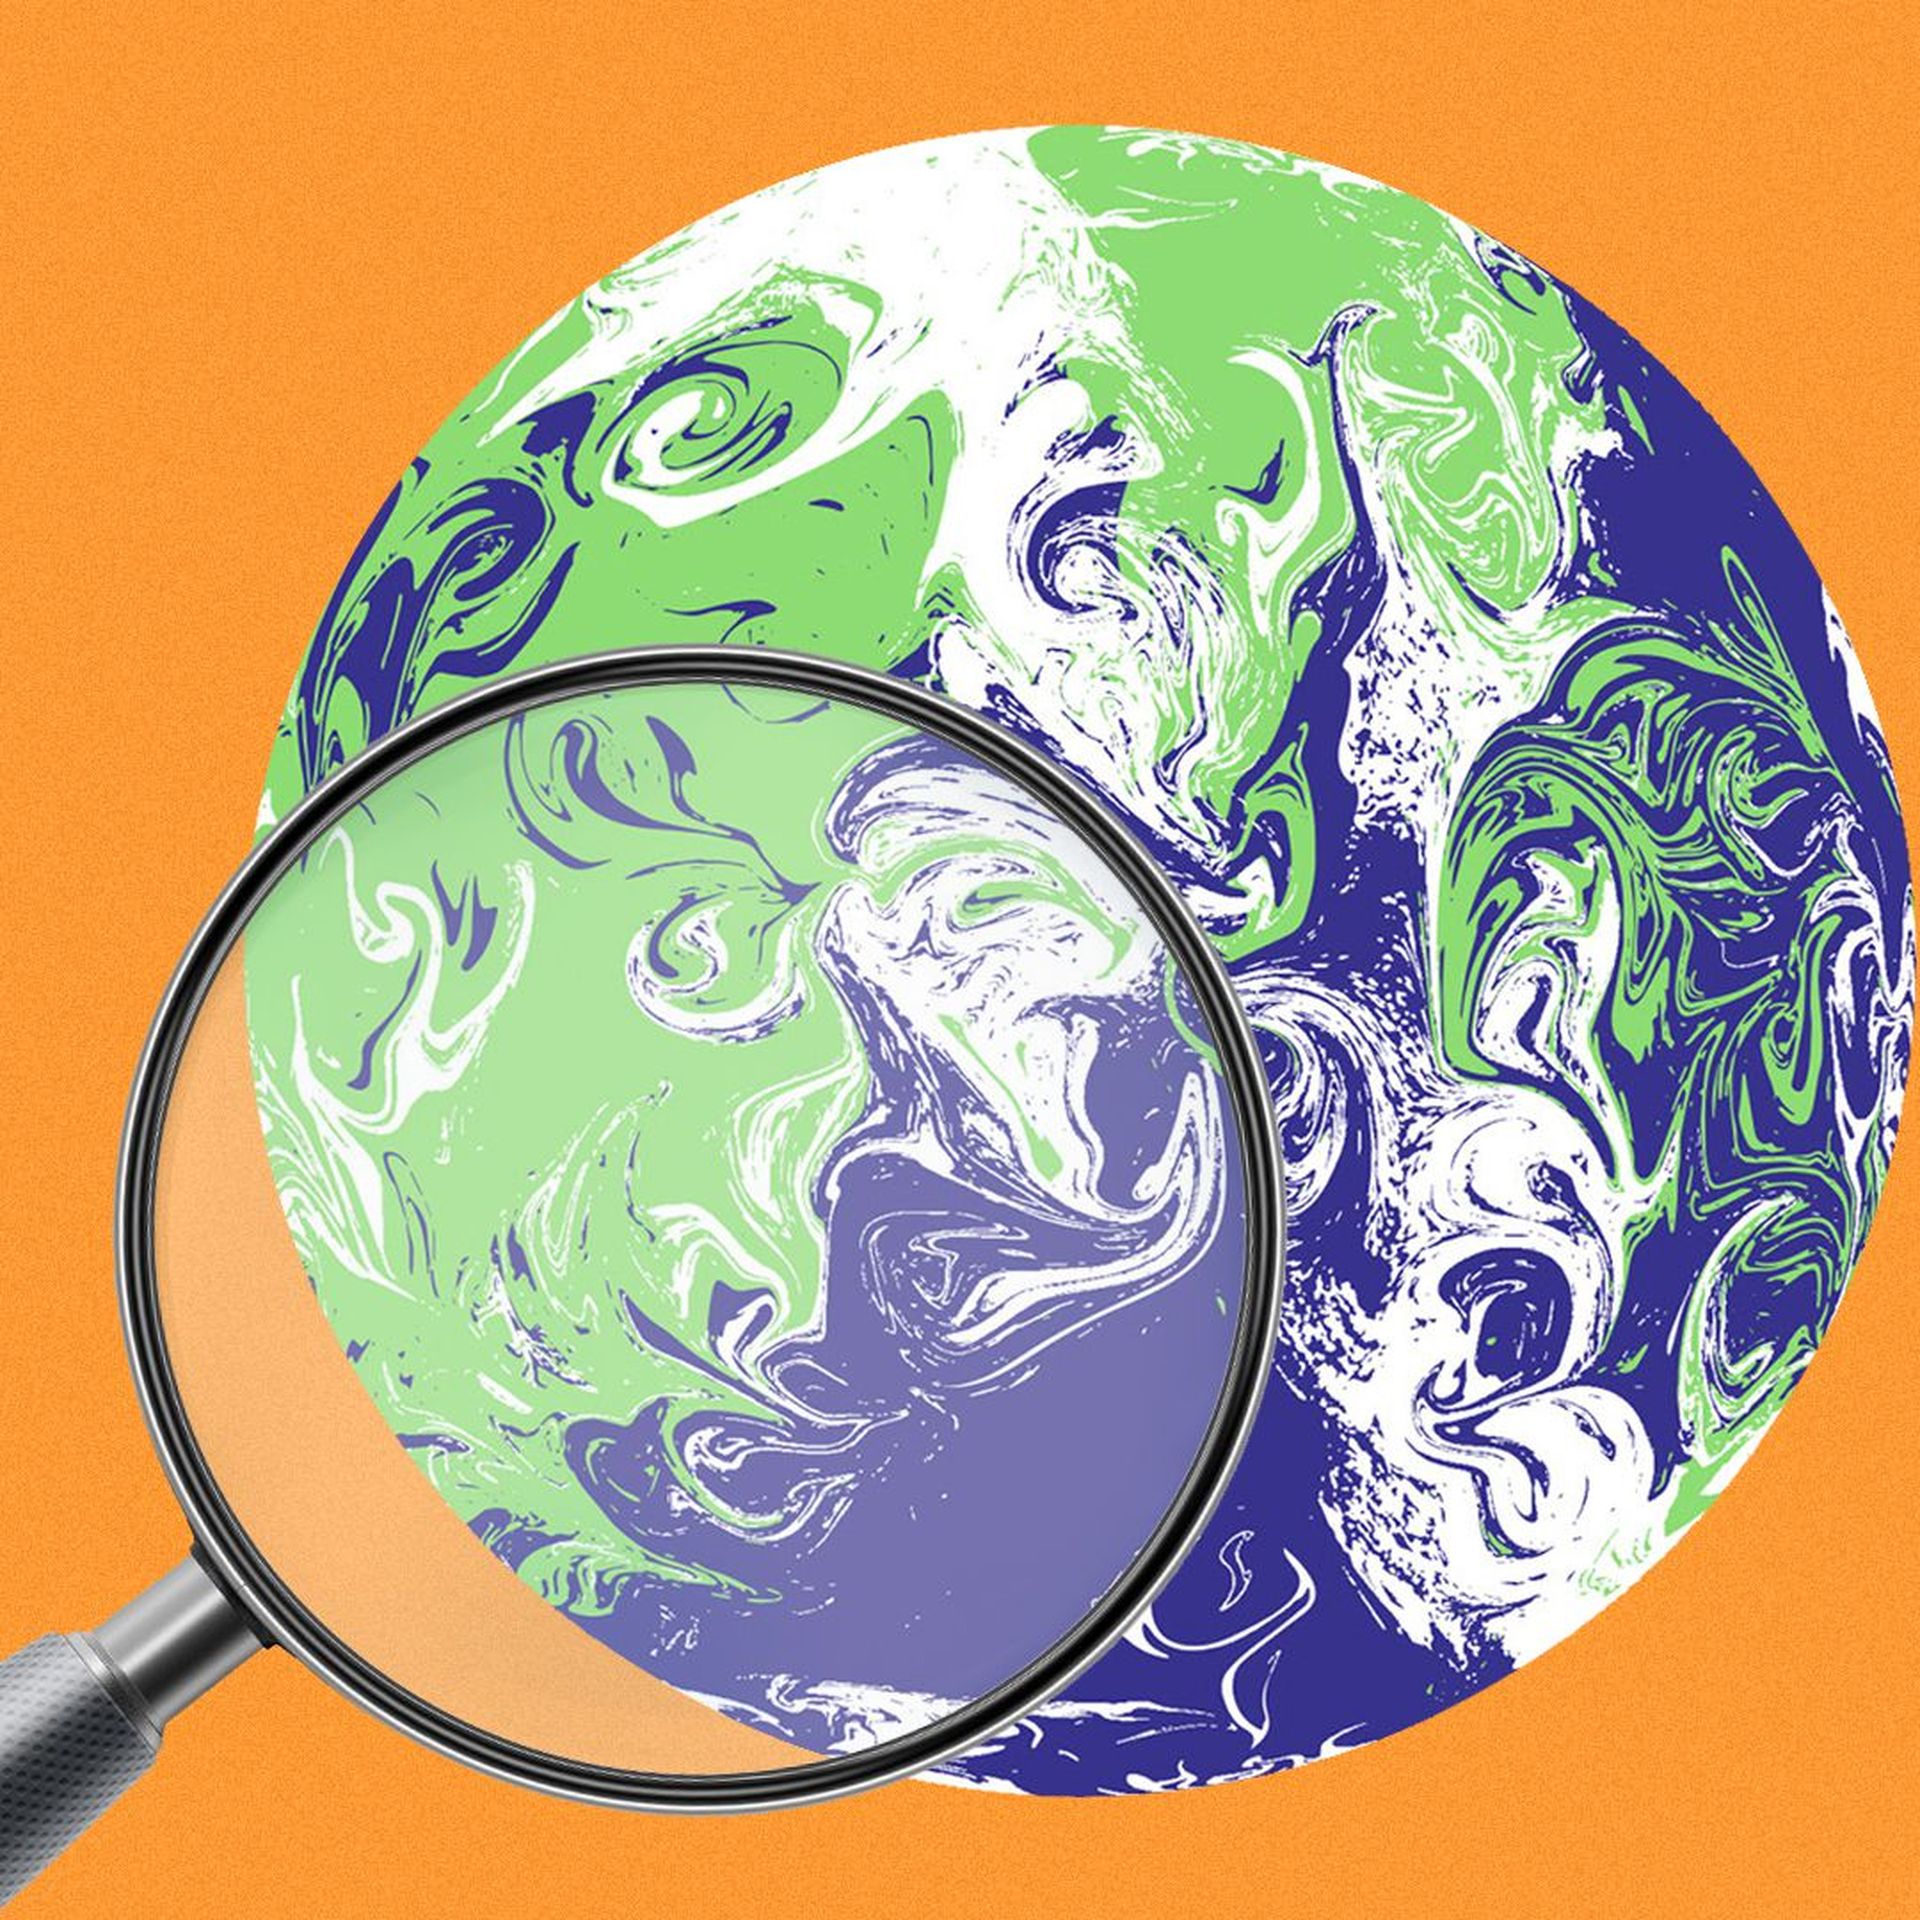 Illustration of a magnifying glass examining the UN Climate Summit logo